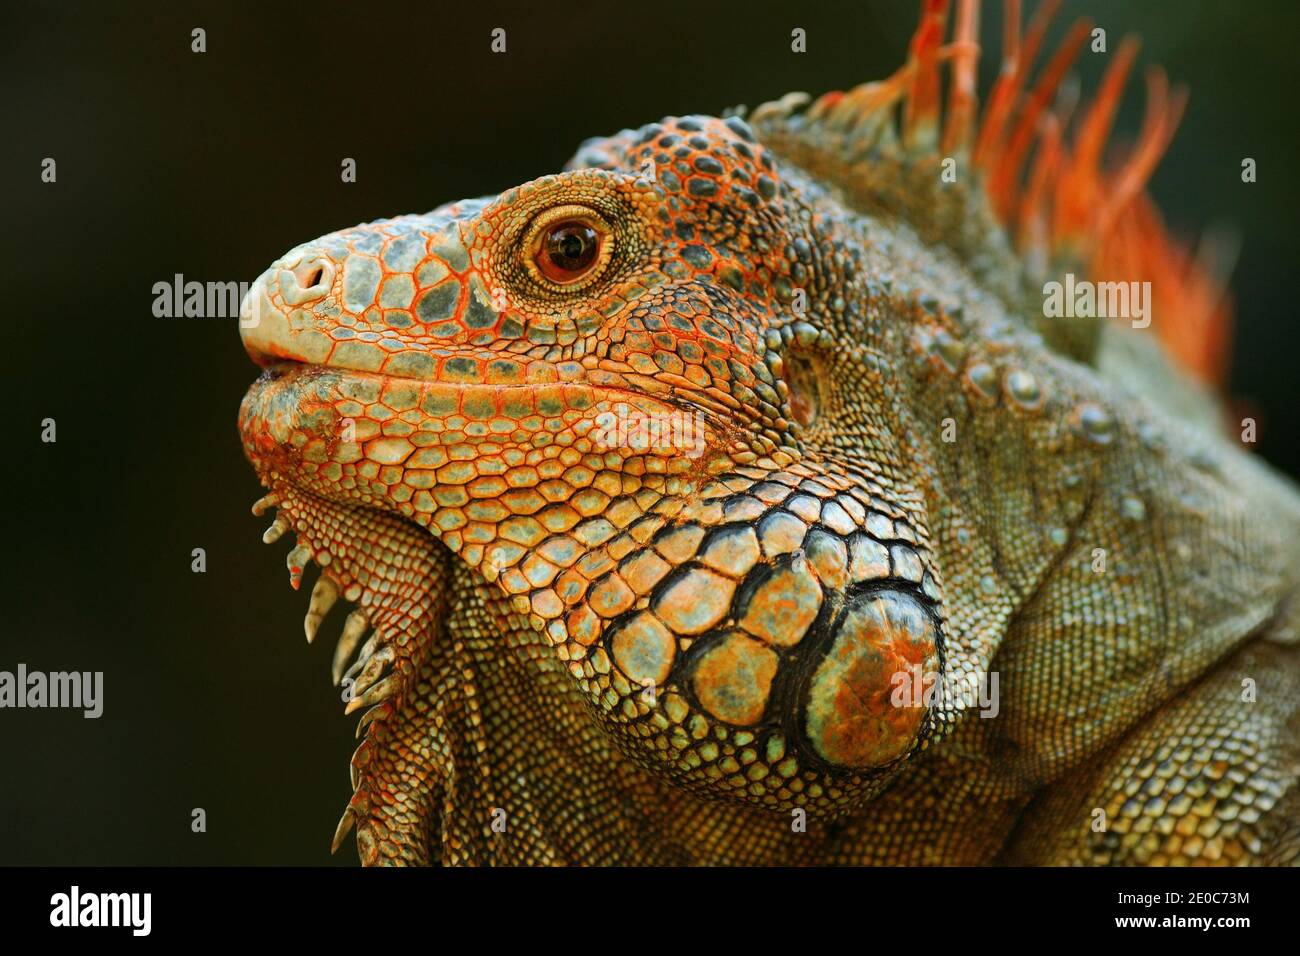 Portrait of orange iguana in the dark green forest, Costa Rica. Wildlife scene from nature. Close-up face portrait of lizard from South America. Stock Photo